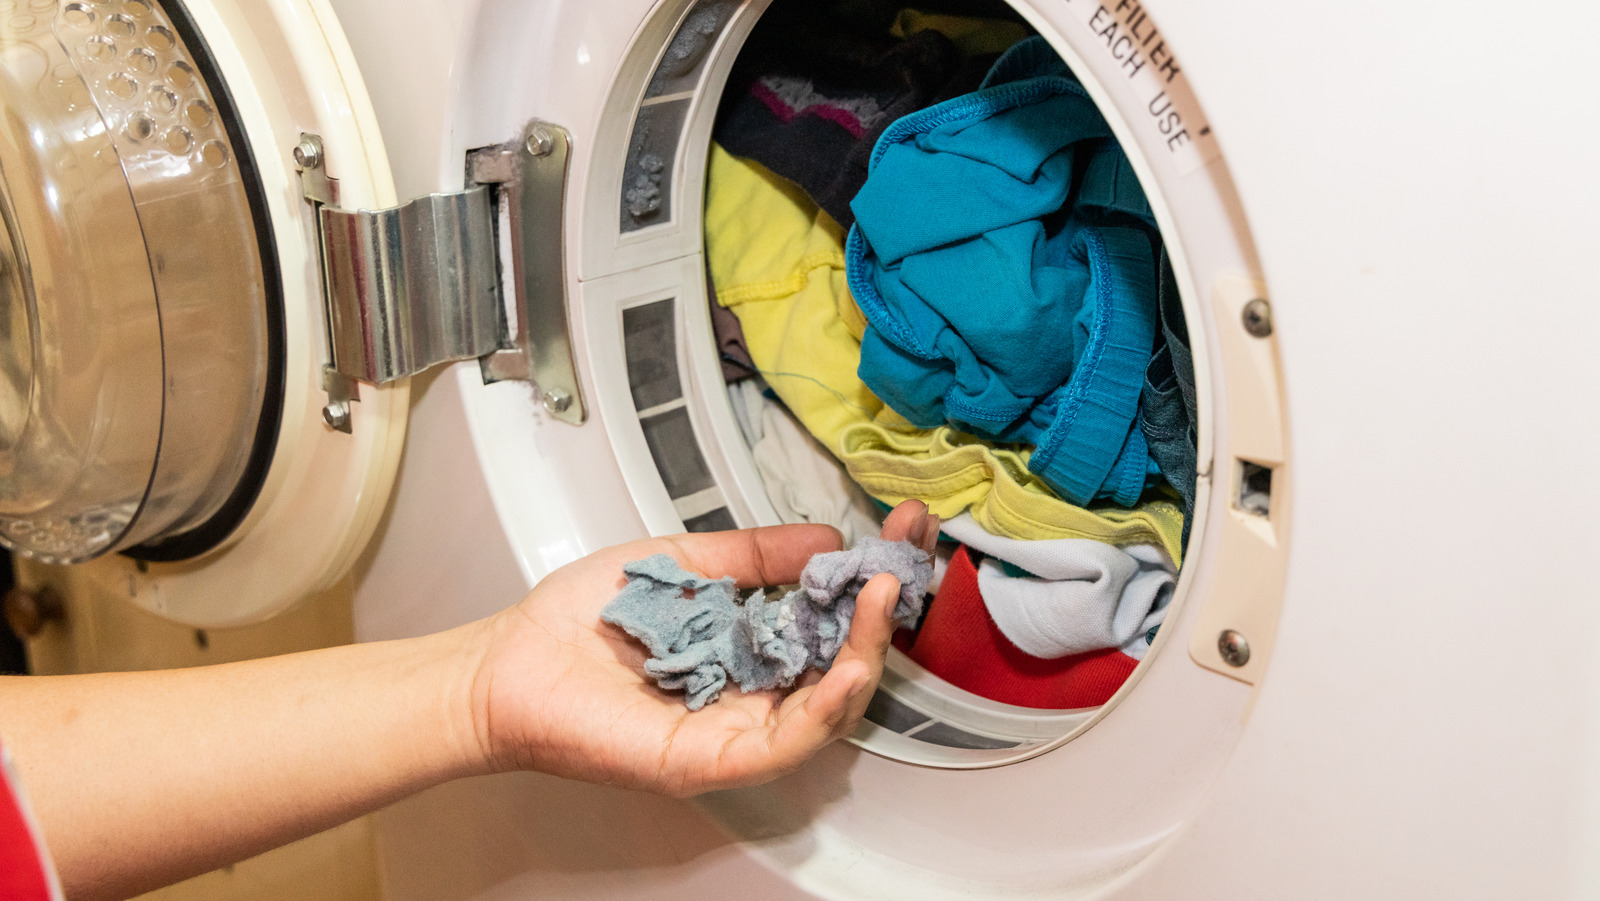 Please remember: Your washing machine also has a lint trap that